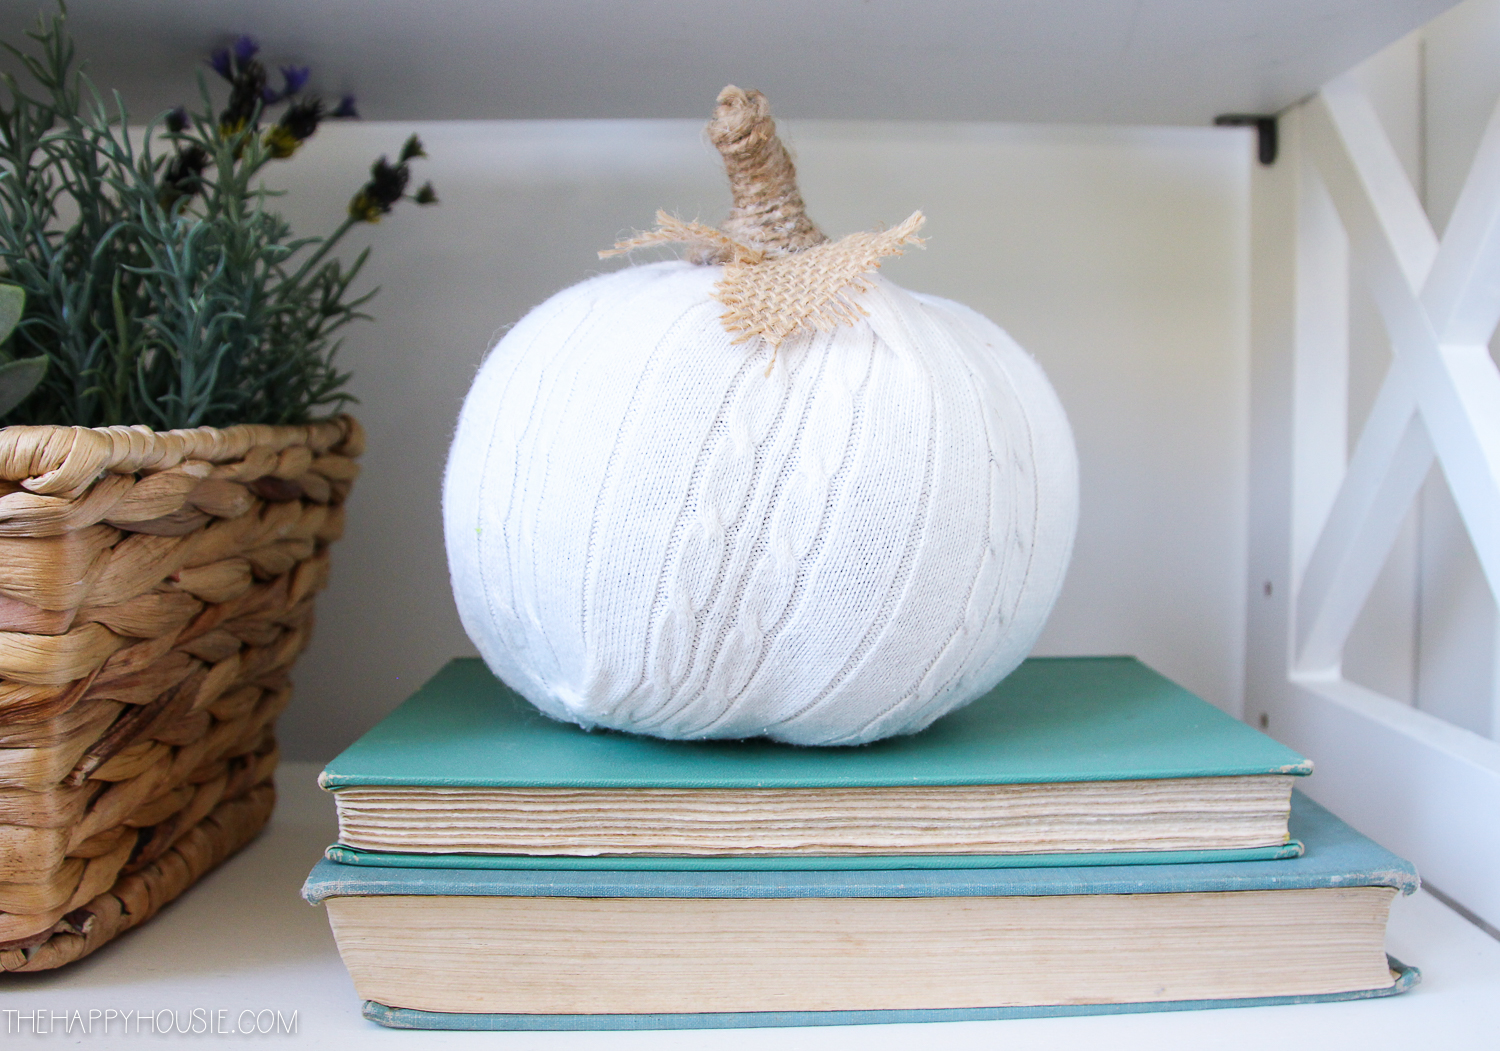 The pumpkin all glued sitting on two books.